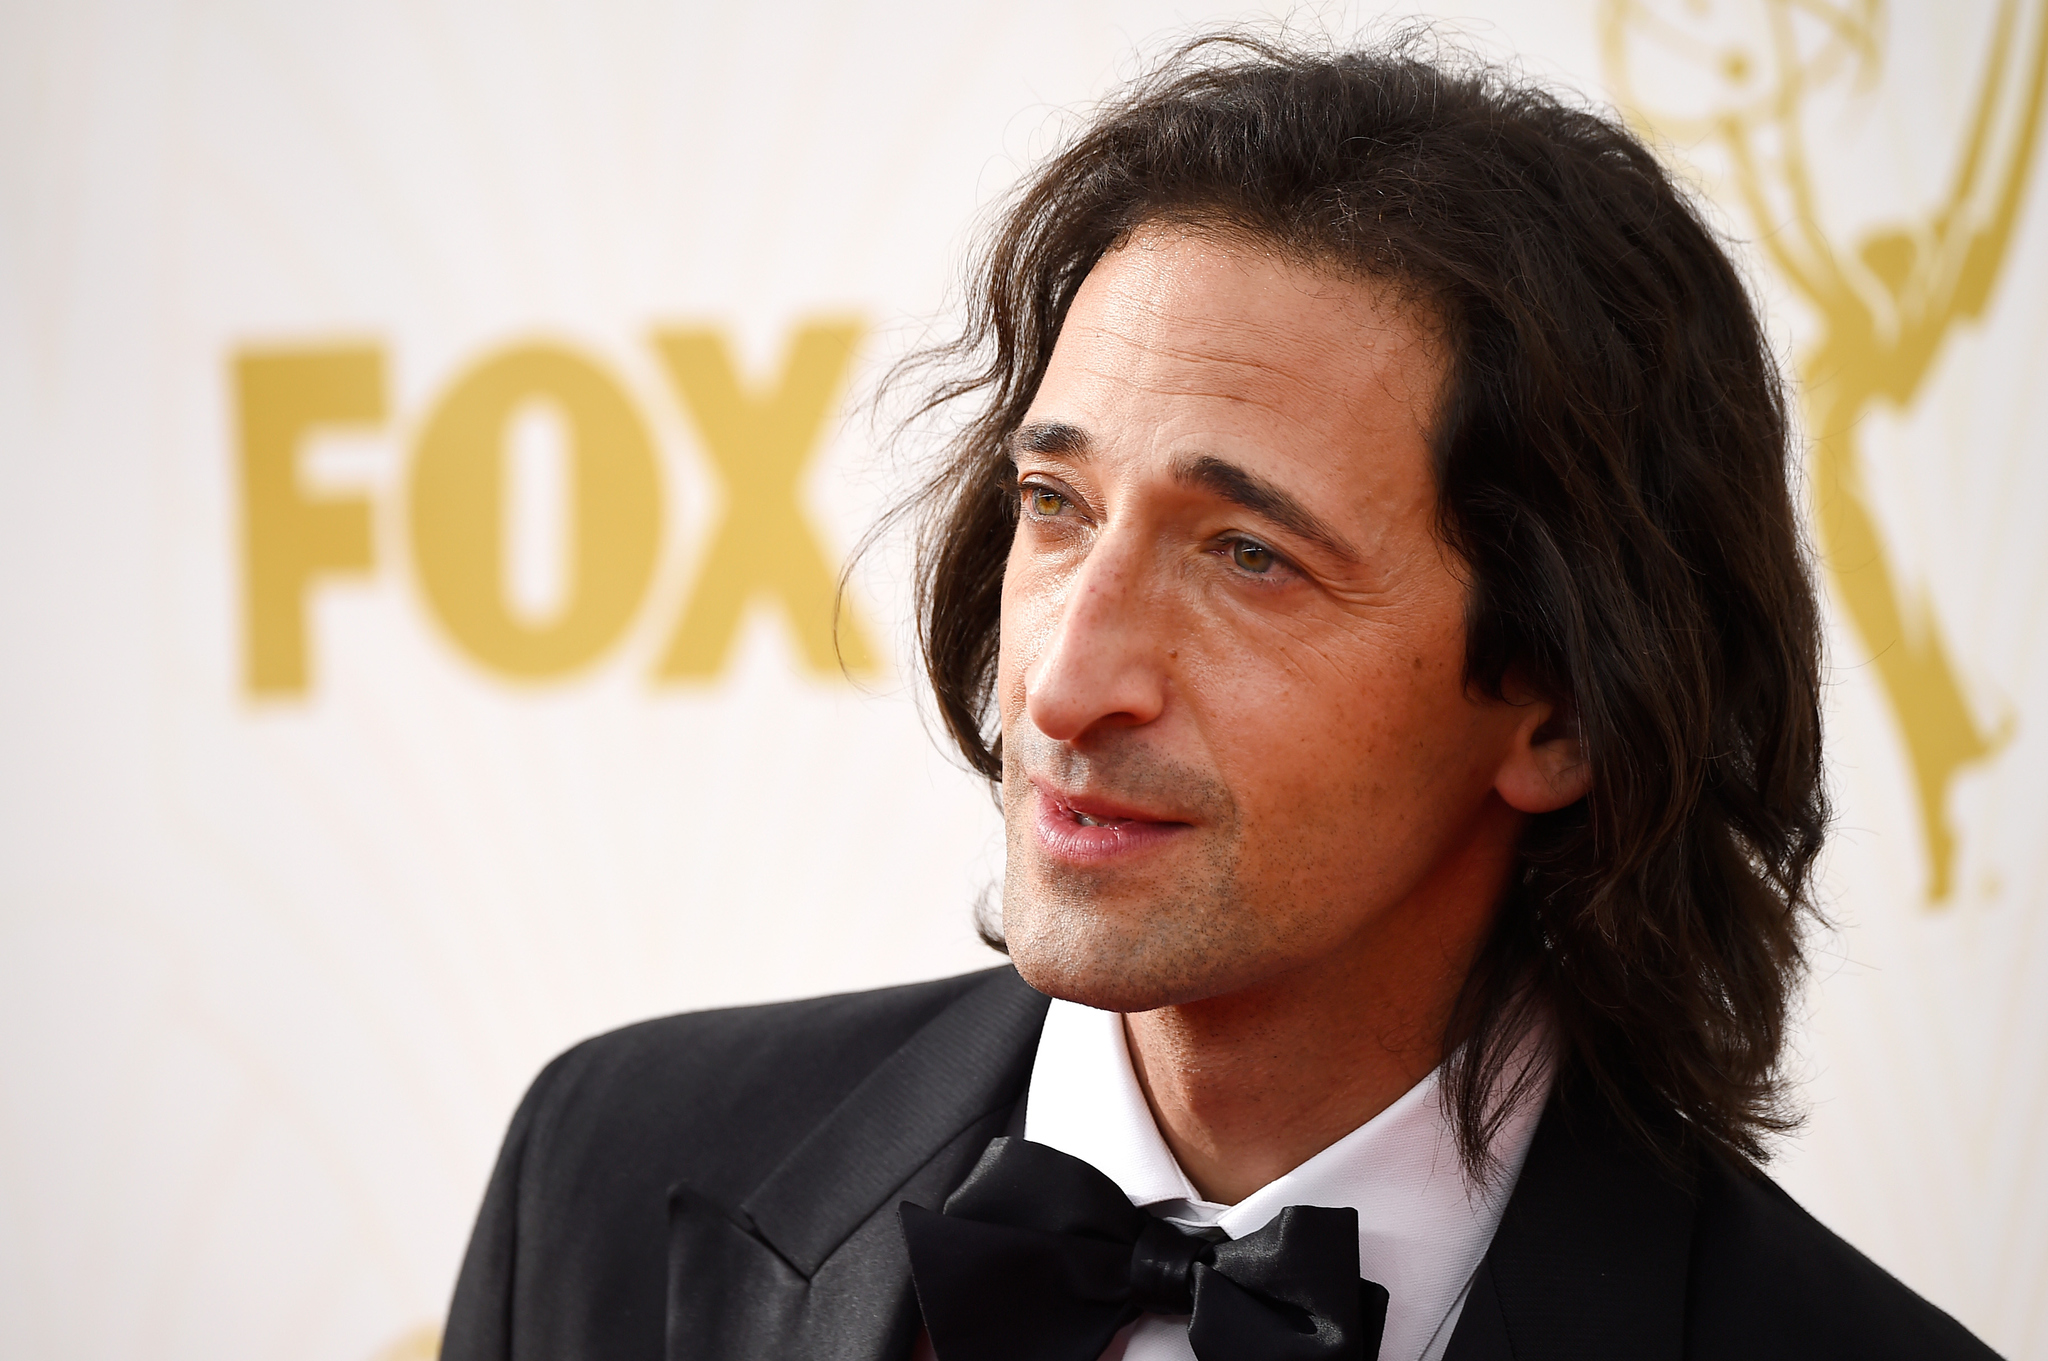 Adrien Brody at event of The 67th Primetime Emmy Awards (2015)